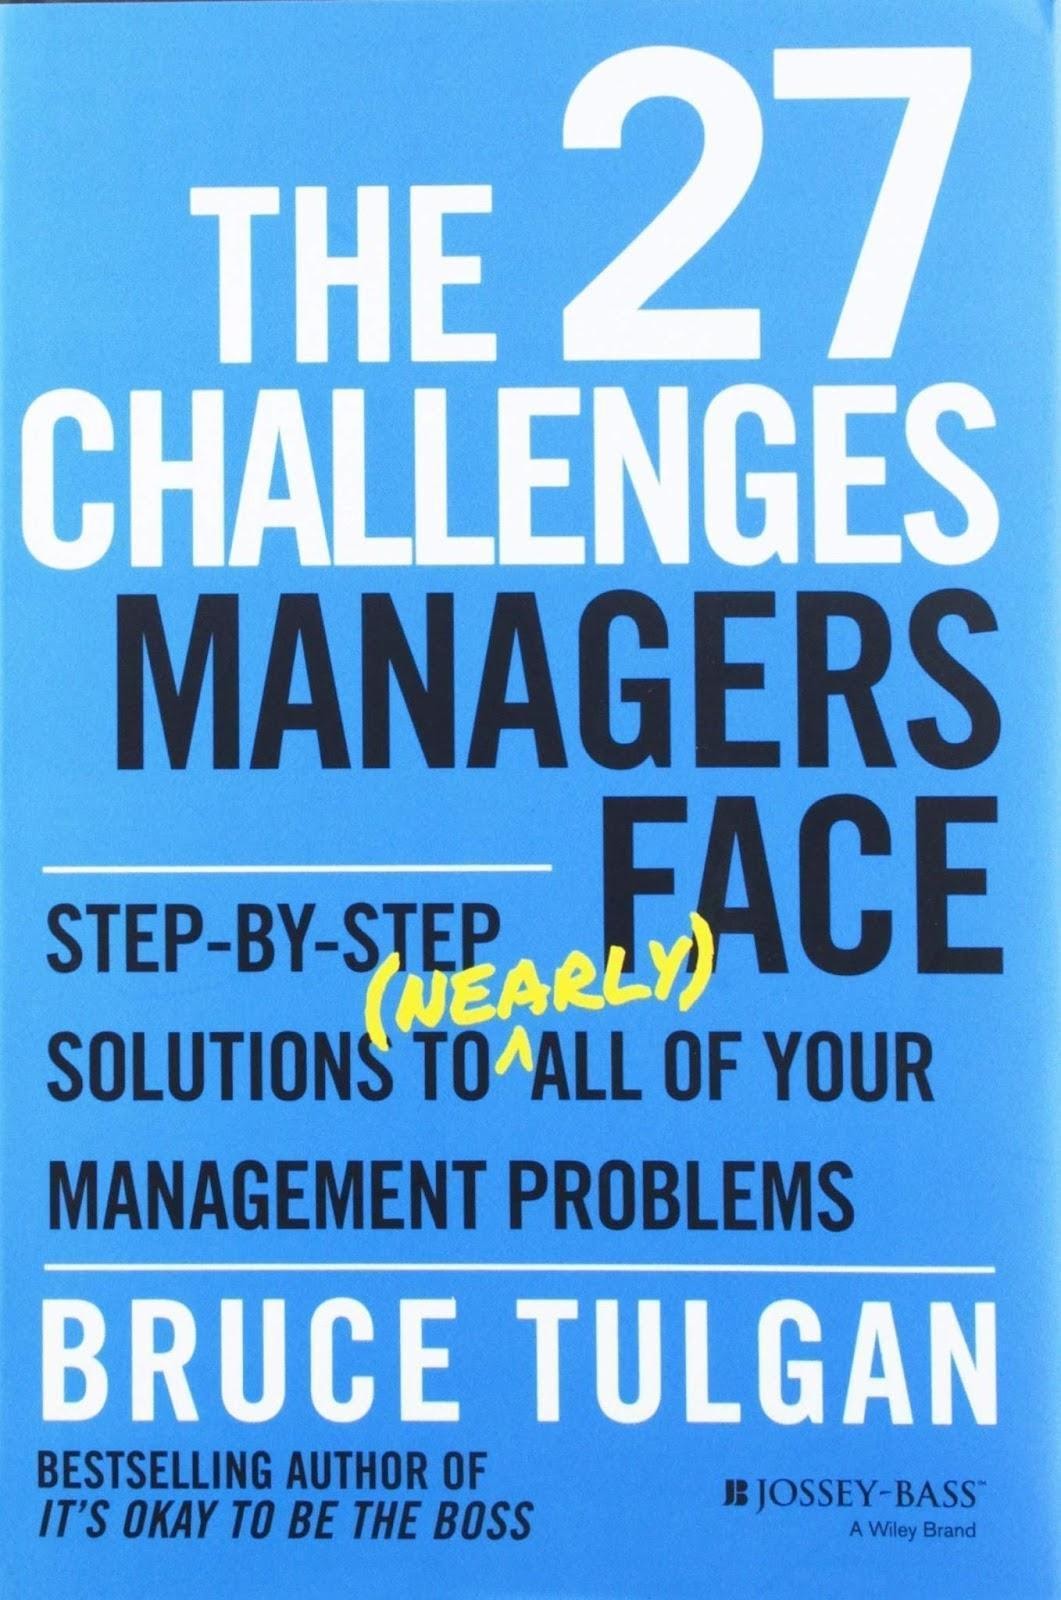 Book 'The 27 Challenges Managers Face'